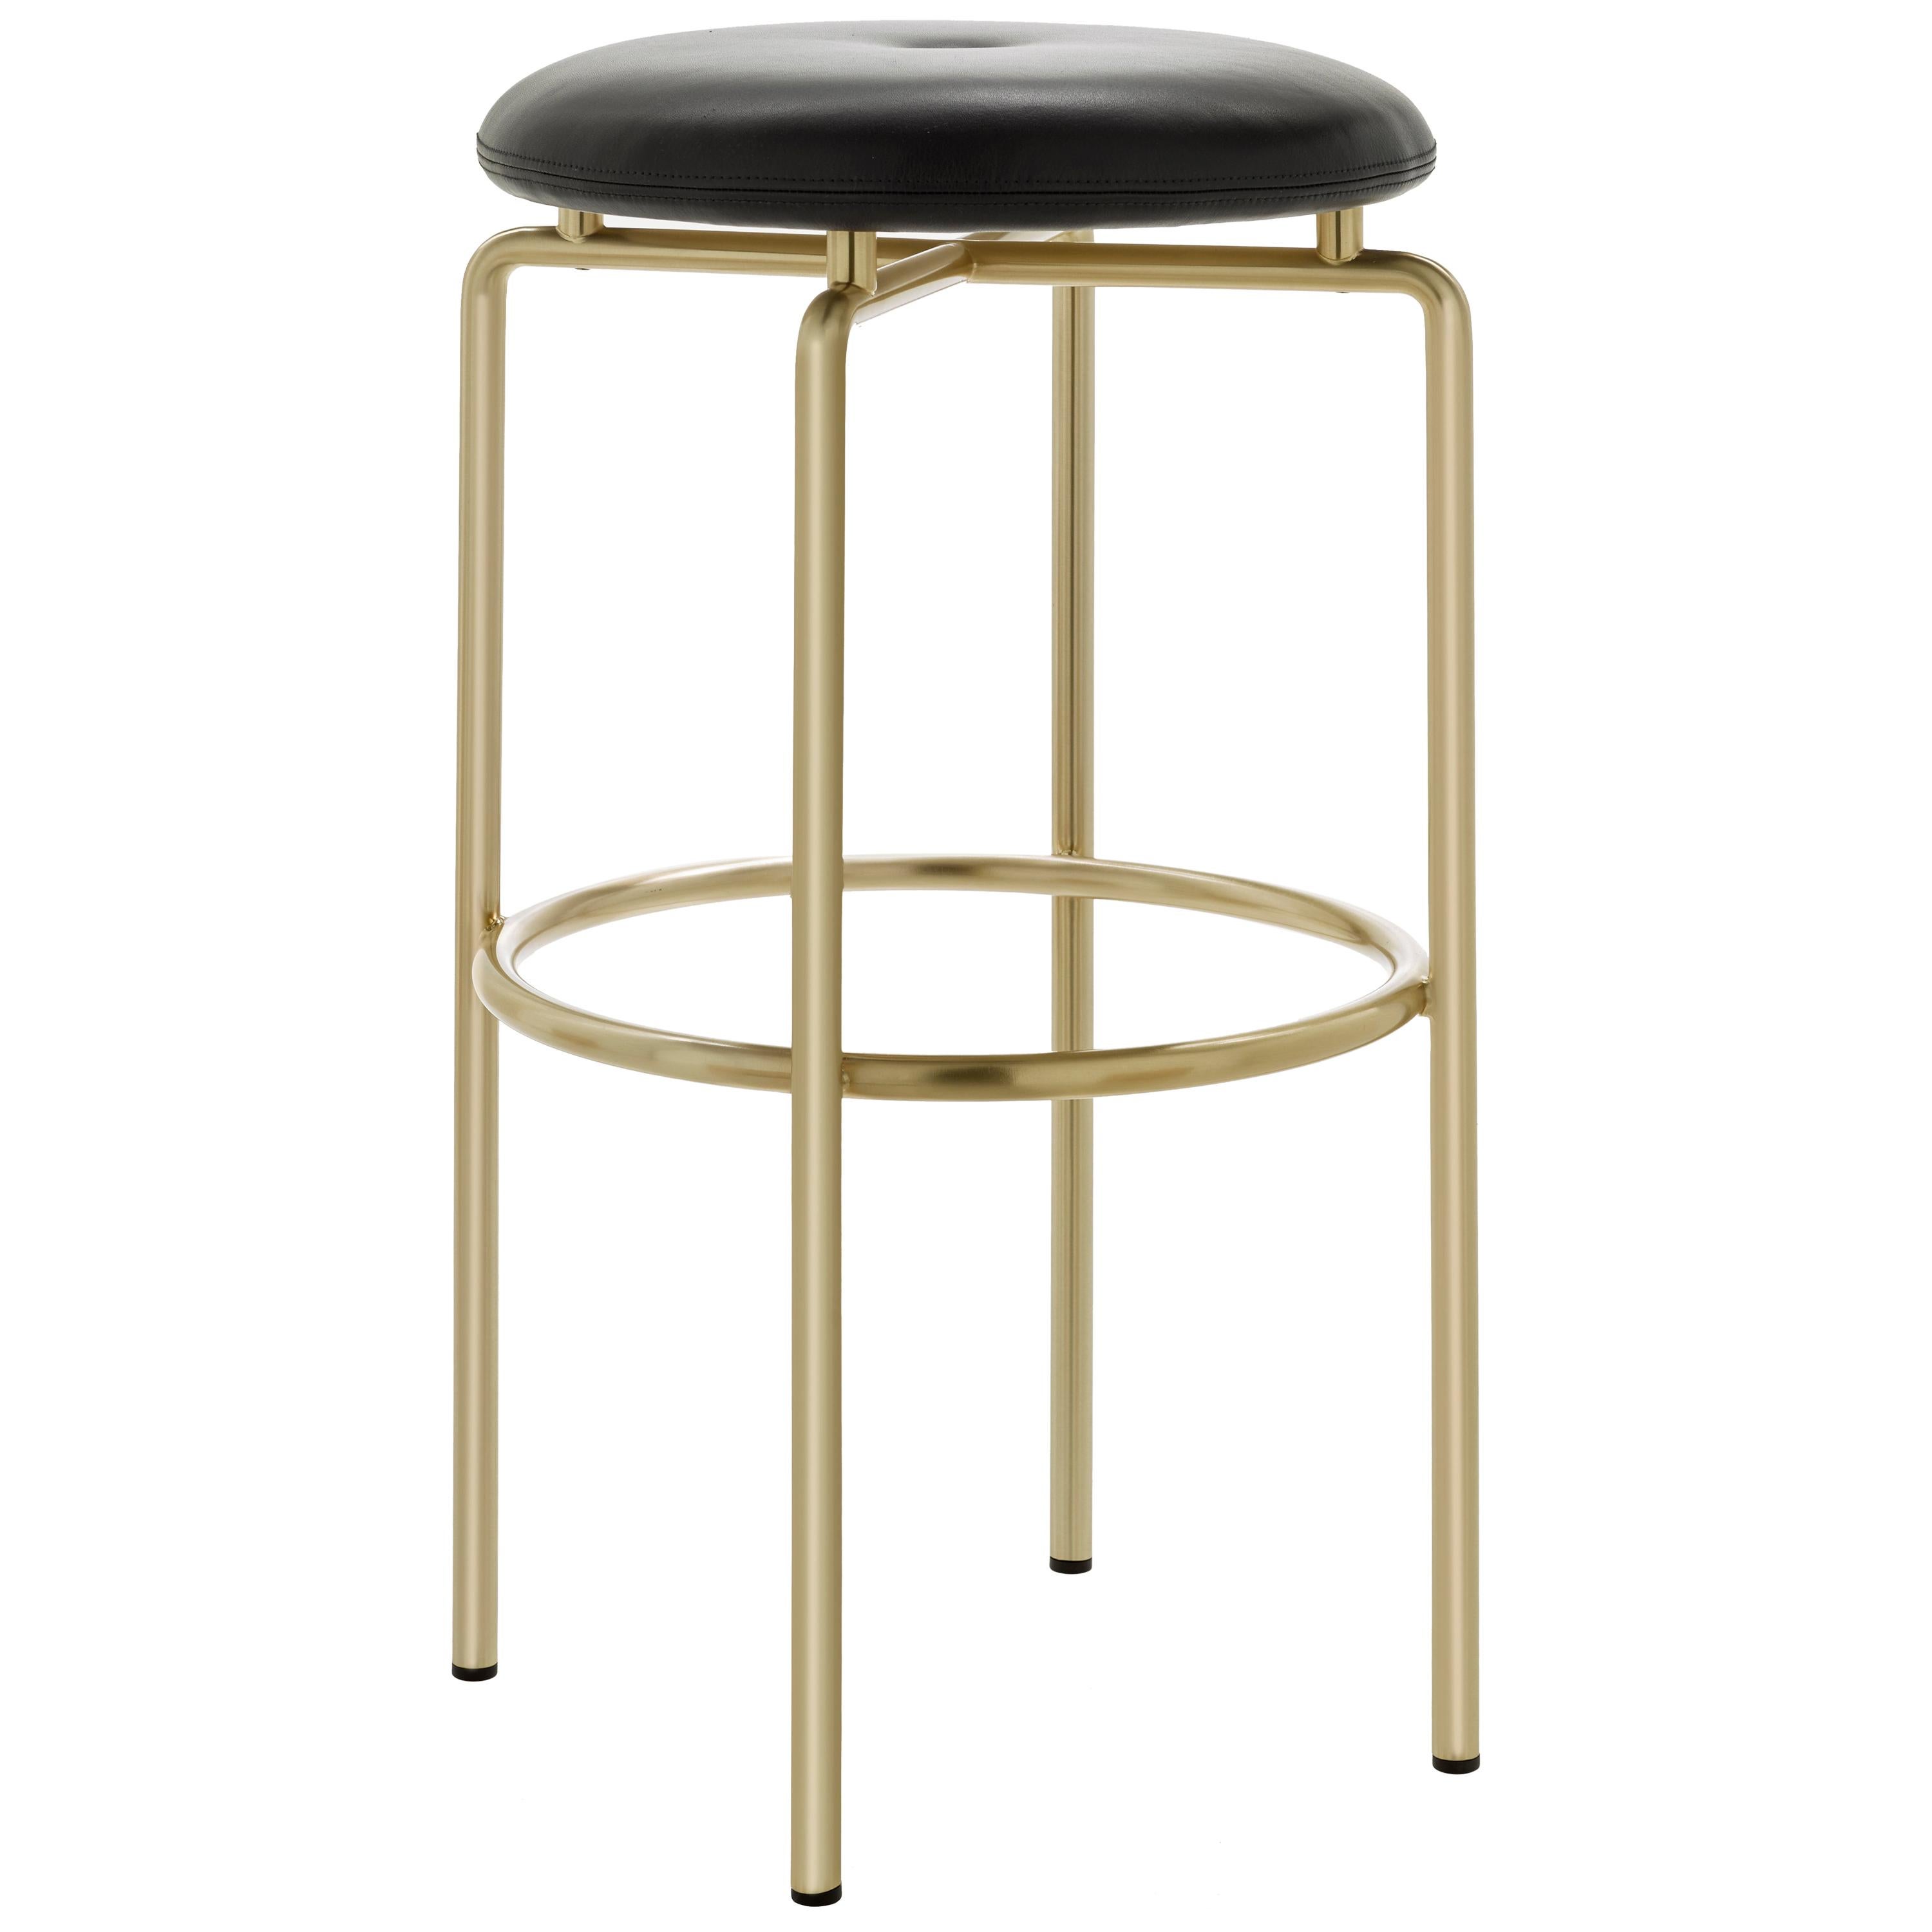 Circular Bar Stool in Satin Brass and Leather Designed by Craig Bassam